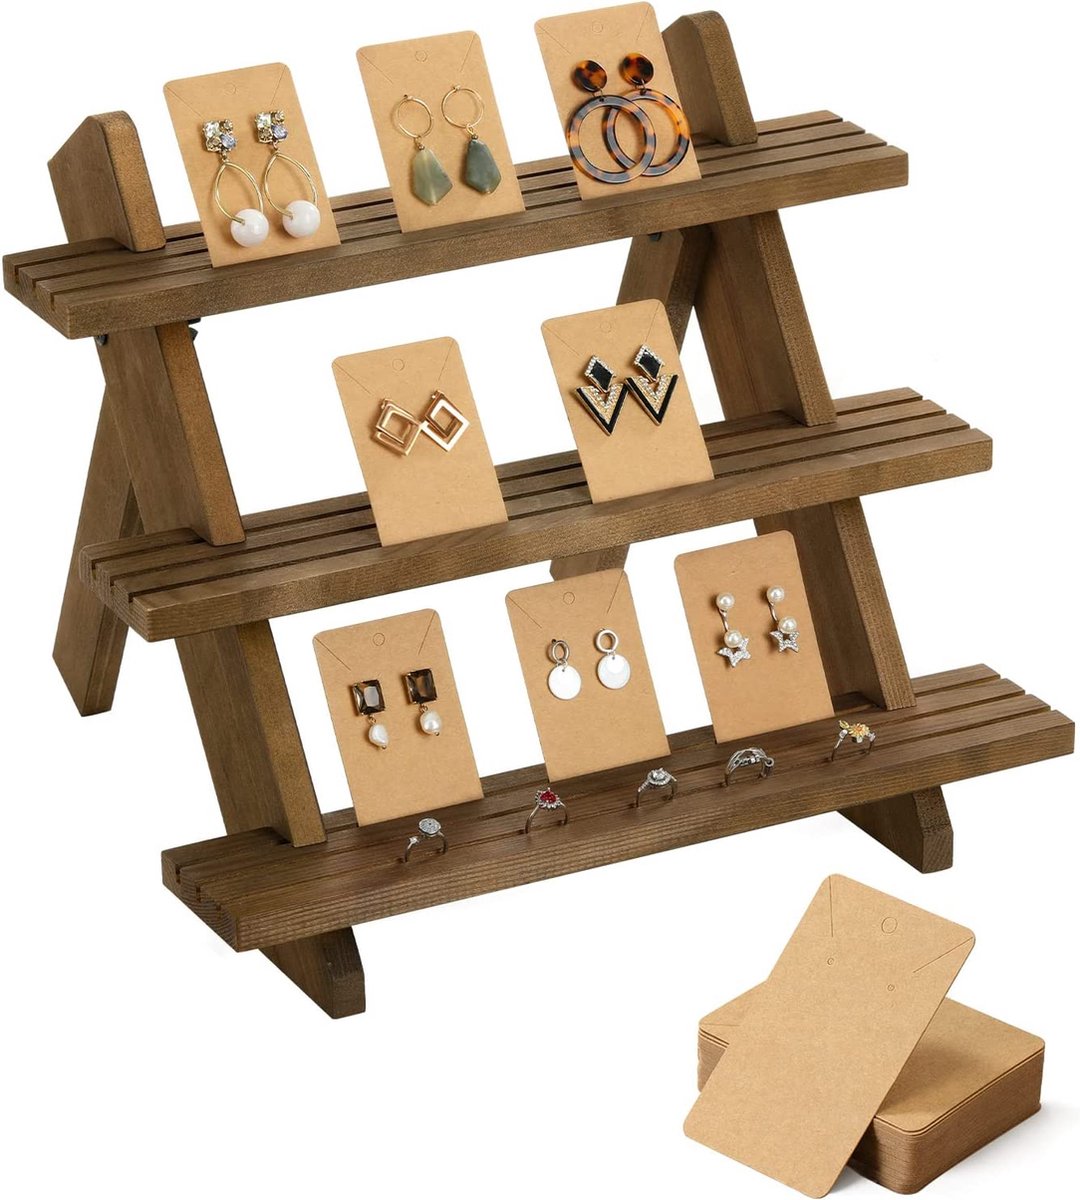 Earring Display Stand, 3-Tier Wooden Earring & Ring Holder Organizer Cascading Showcase Jewelry Stand Earring Cardboard Display Shelf Stand Card Holder for Tabletop Shows, Brown